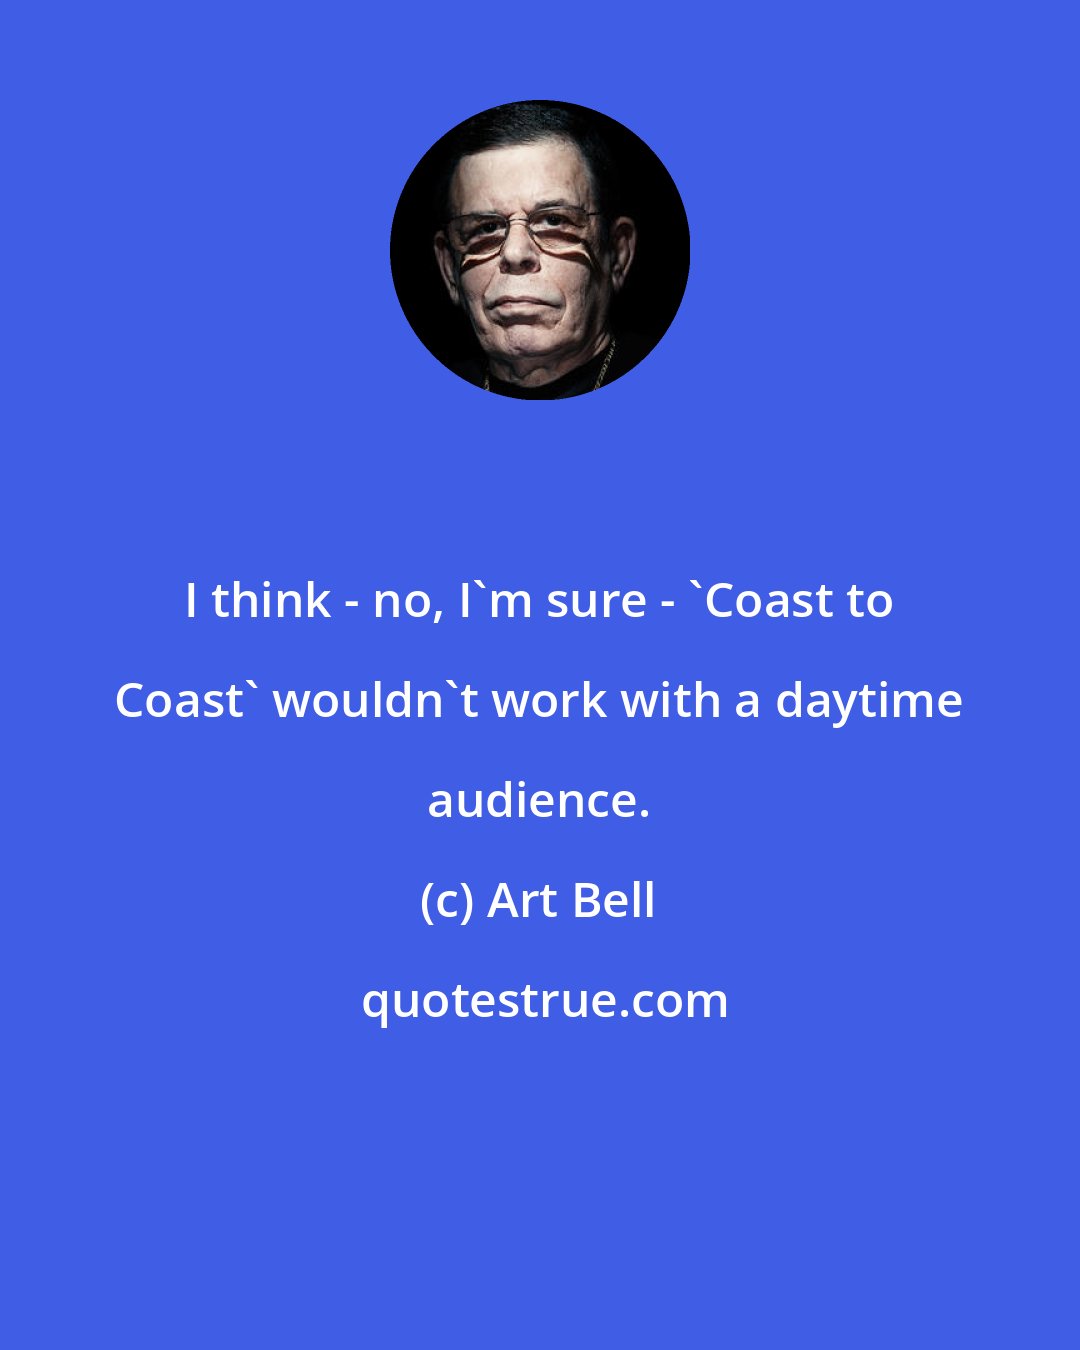 Art Bell: I think - no, I'm sure - 'Coast to Coast' wouldn't work with a daytime audience.